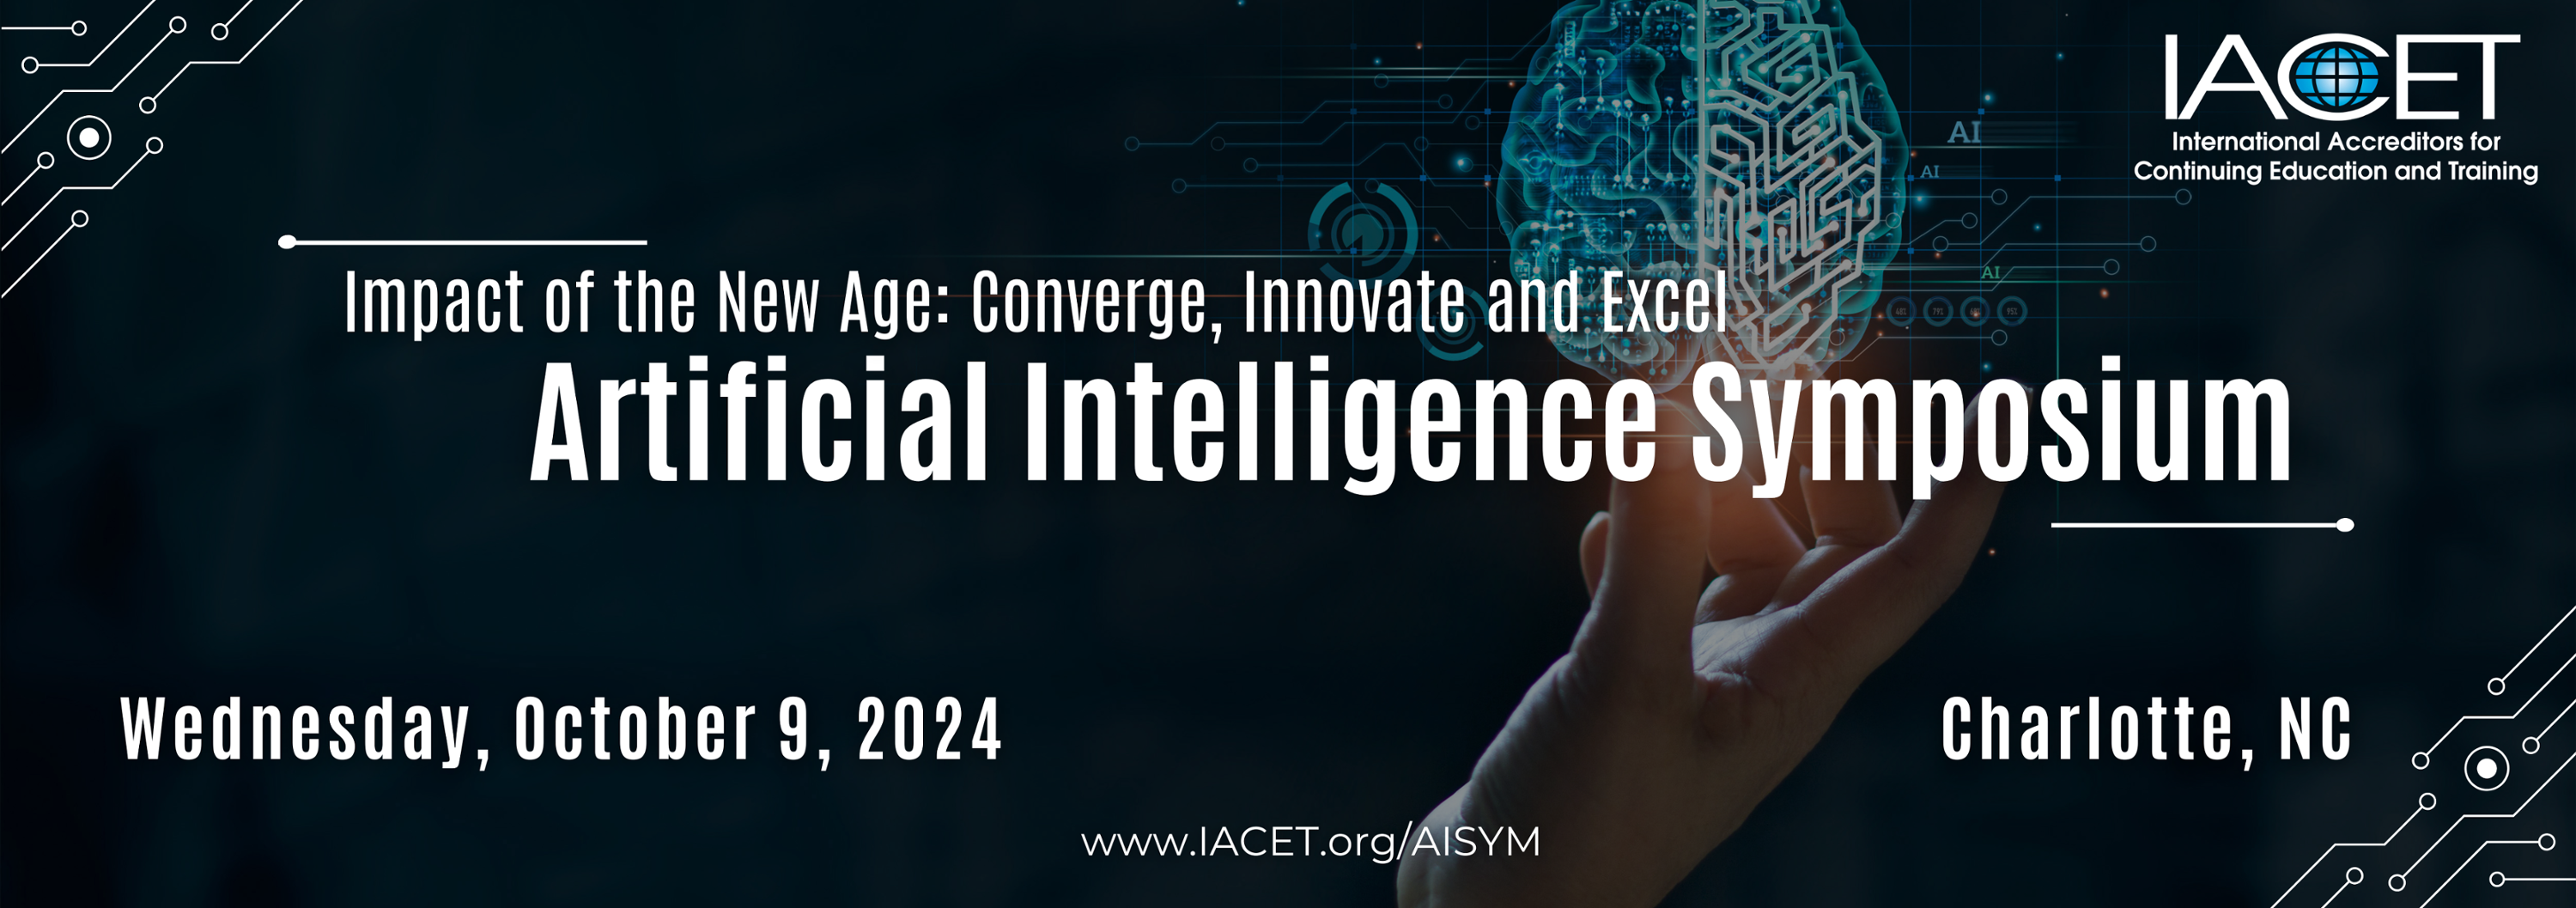 Promotional banner for IACET's Artificial Intelligence Symposium titled 'Impact of the New Age: Converge, Innovate and Excel.' The banner features a futuristic design with a blue and black color scheme, incorporating circuit board patterns and an AI brain illustration. Details include the event date 'Wednesday, October 9, 2024', the location 'Charlotte, NC', and the website 'www.IACET.org/AISYM'